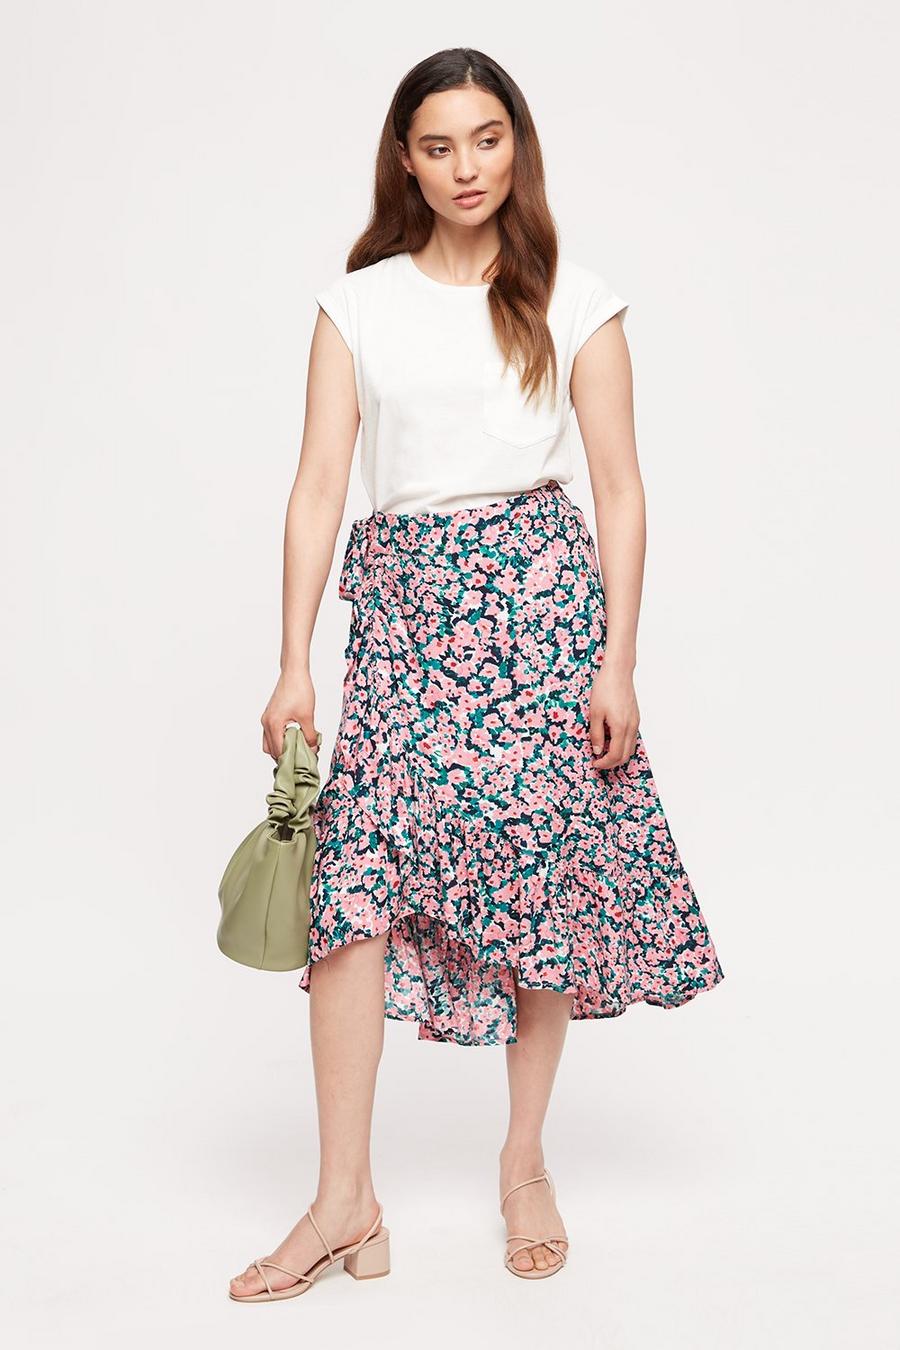 Petite Pink And Green Skirt